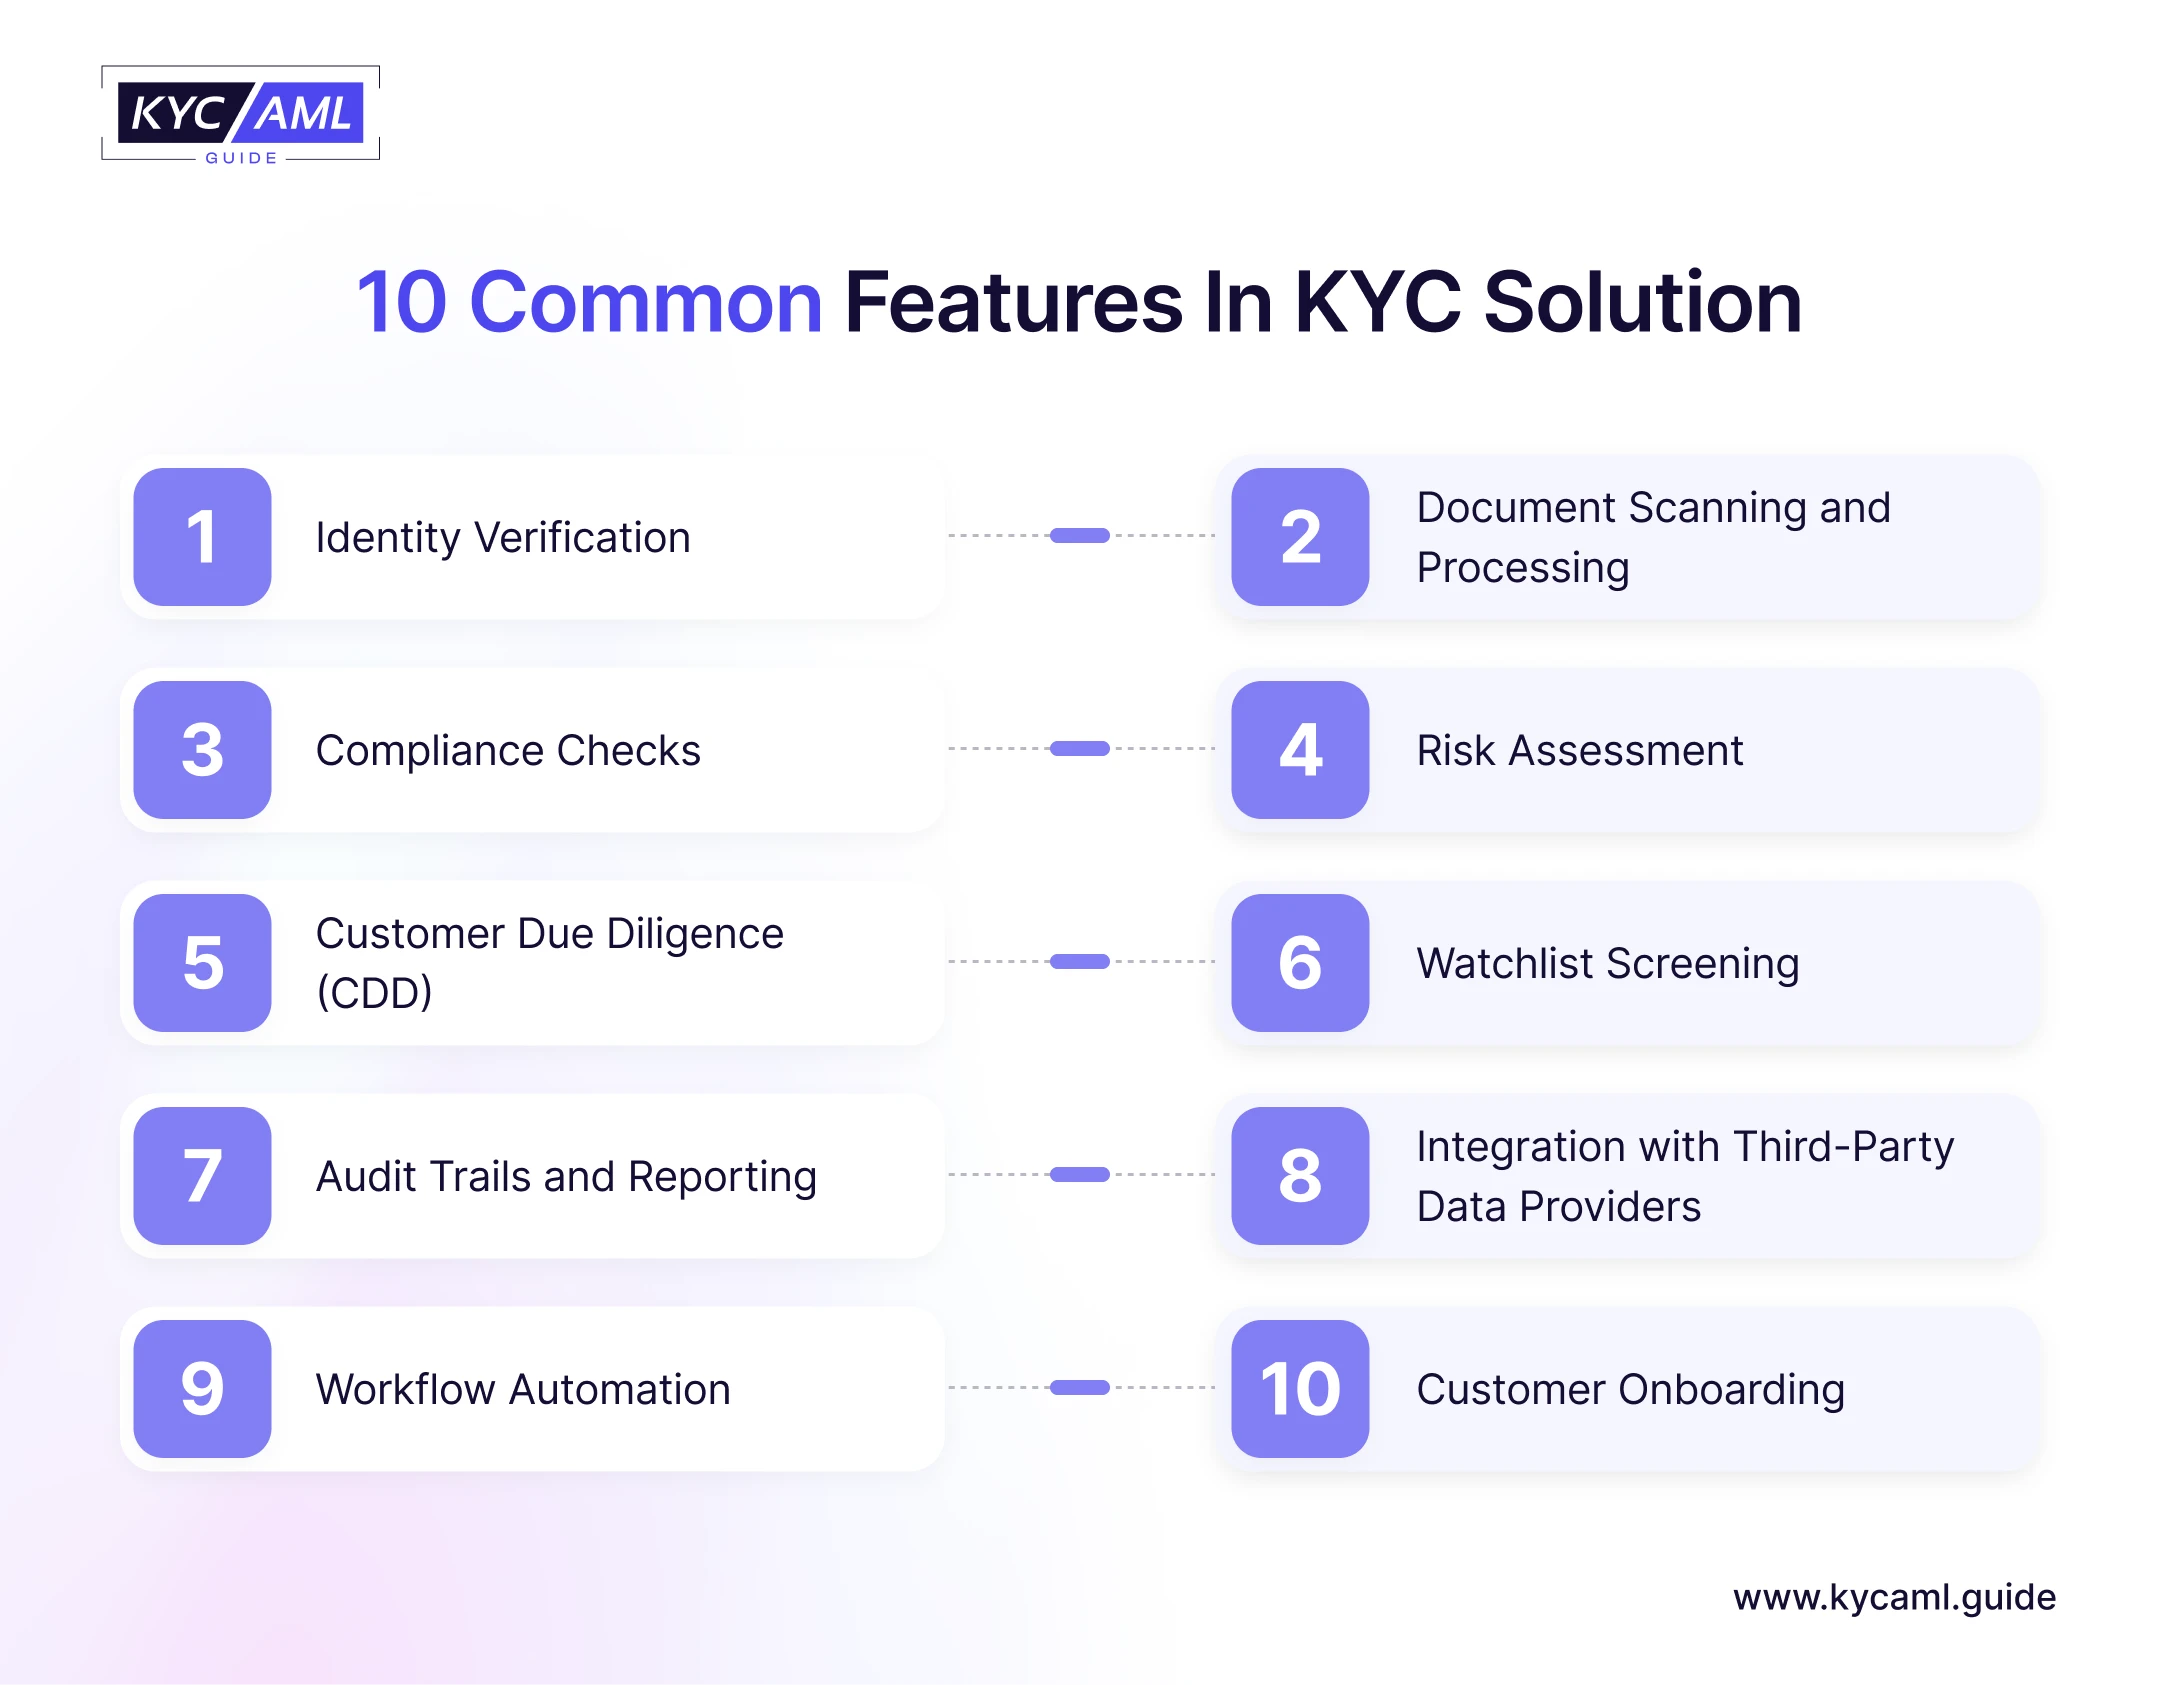 Key Features to Look for in a KYC IDV Solution